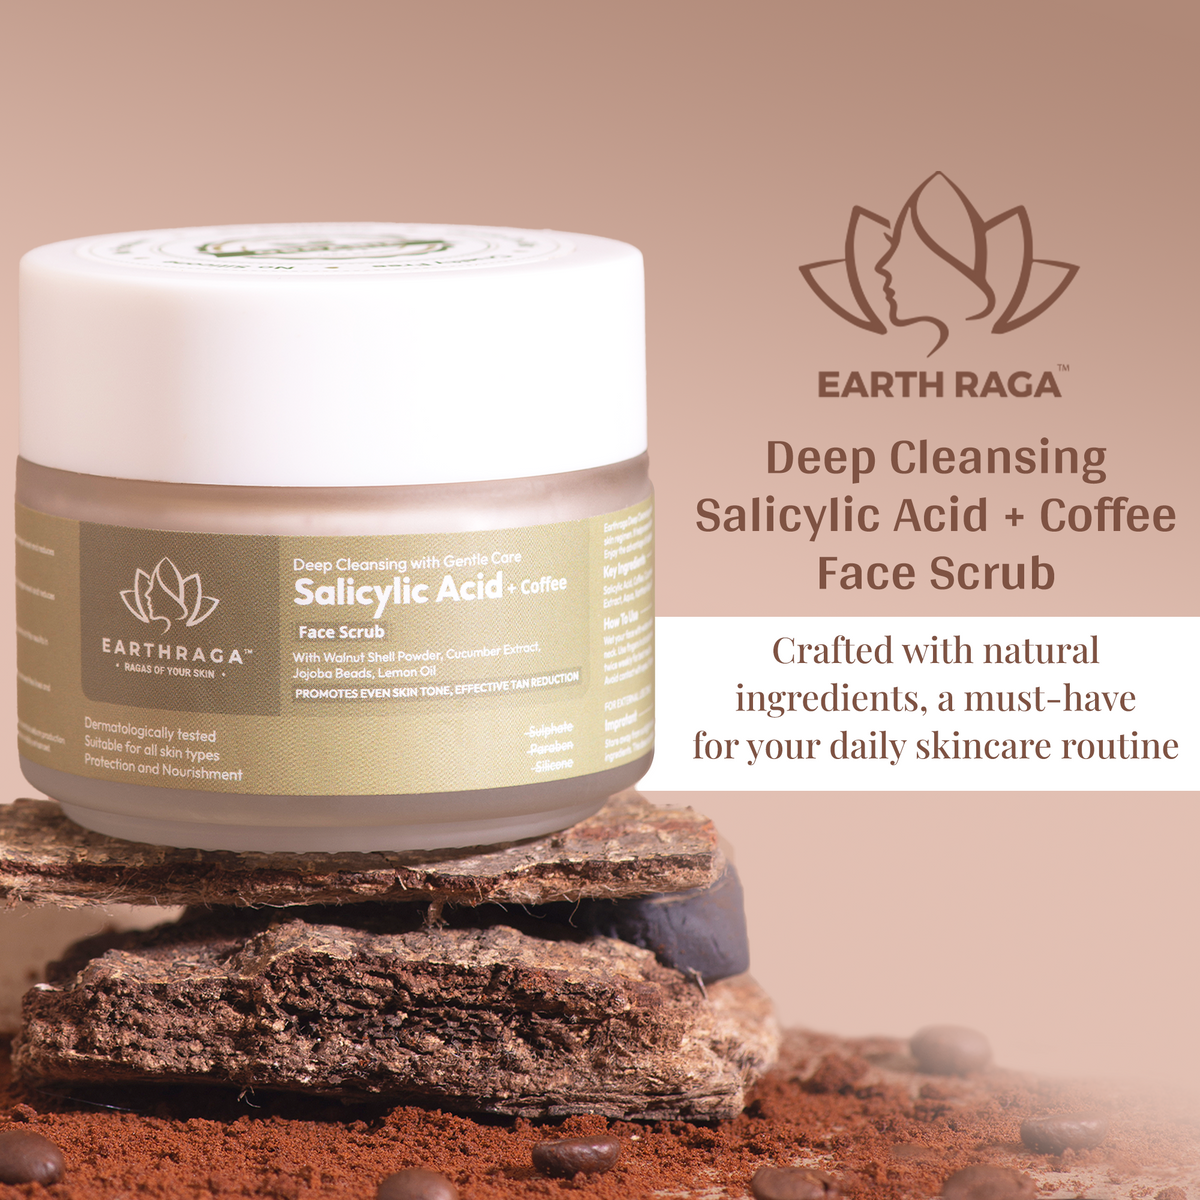 Deep Cleansing with Gentle Care Salicylic Acid + Coffee Face Scrub | 100ml